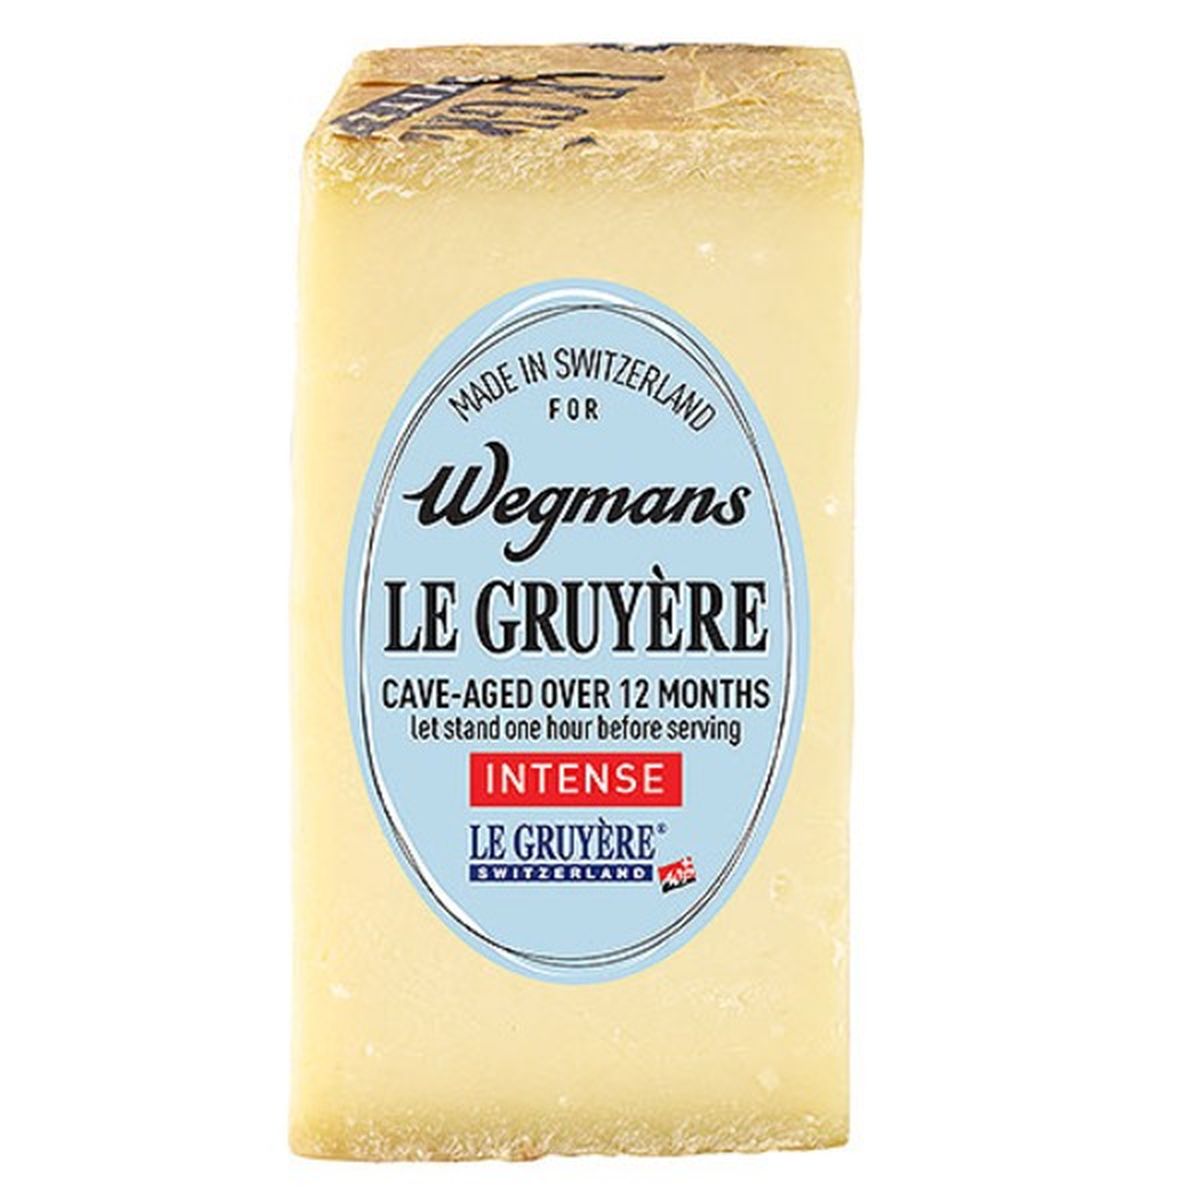 Calories in Wegmans Intense Cave-Aged Le Gruyere Swiss Cheese